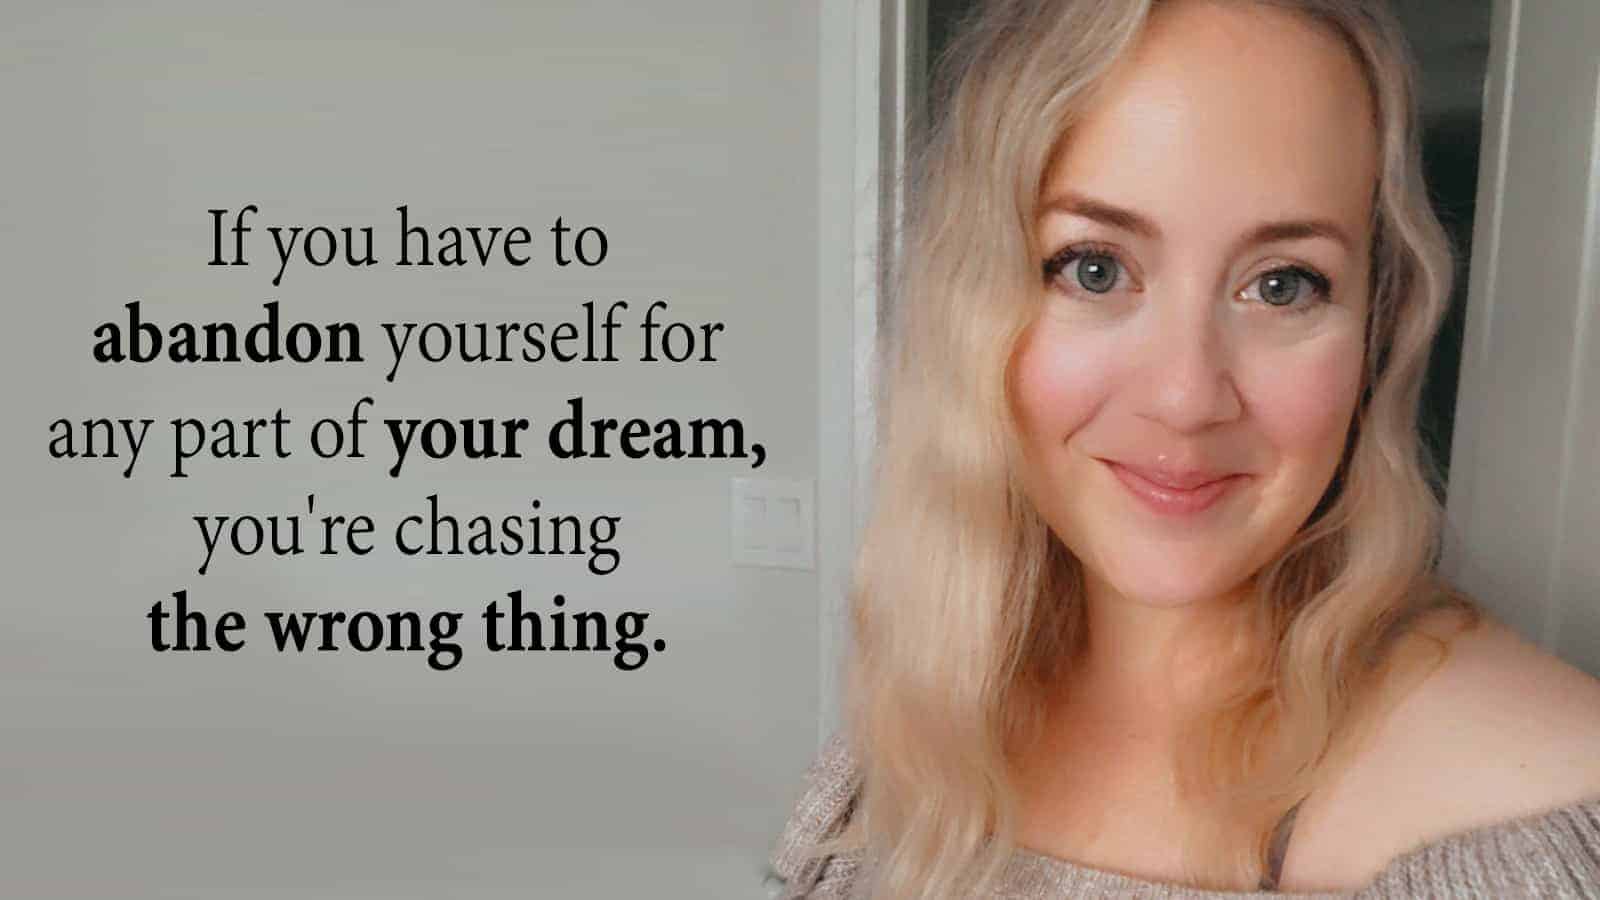 Wise Woman Shares an Inspiring Message About Knowing Your Self-Worth